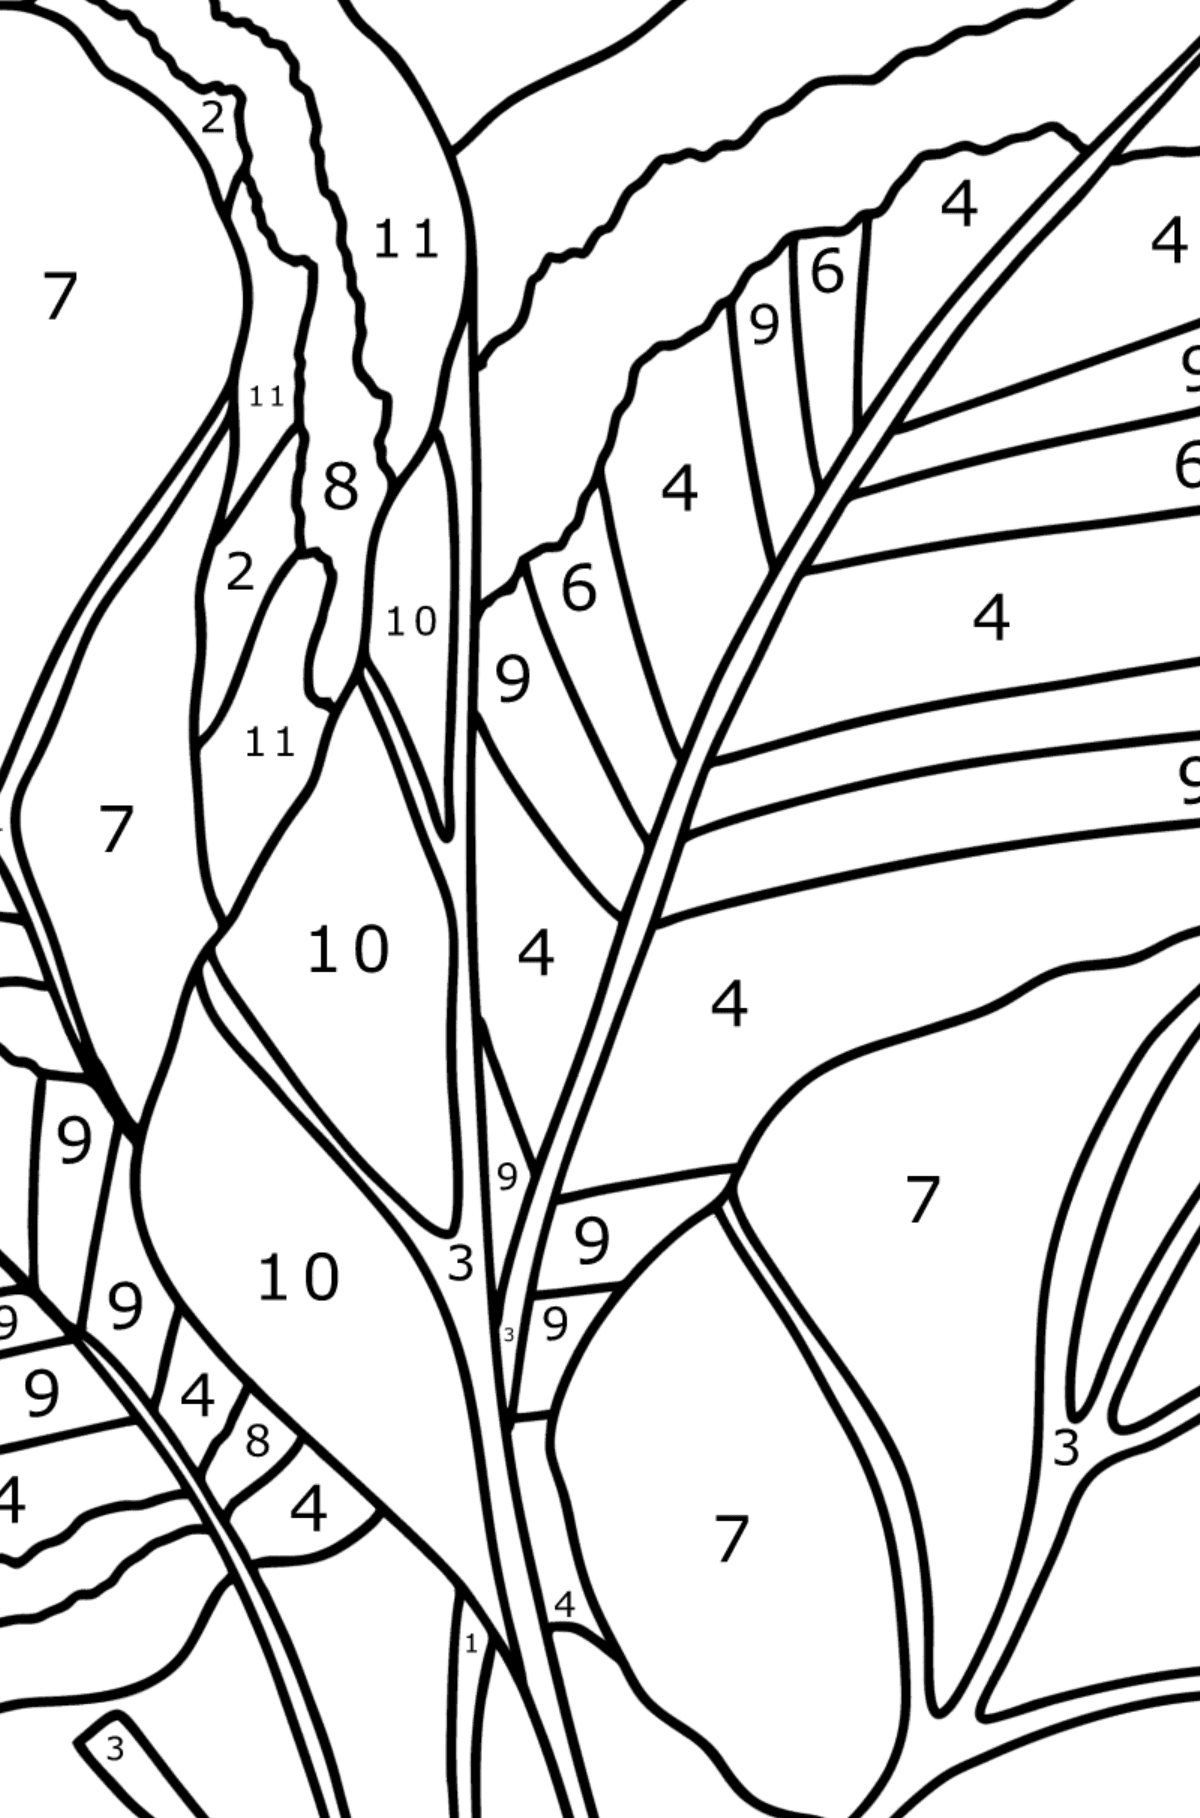 Arrowroot coloring page - Coloring by Numbers for Kids